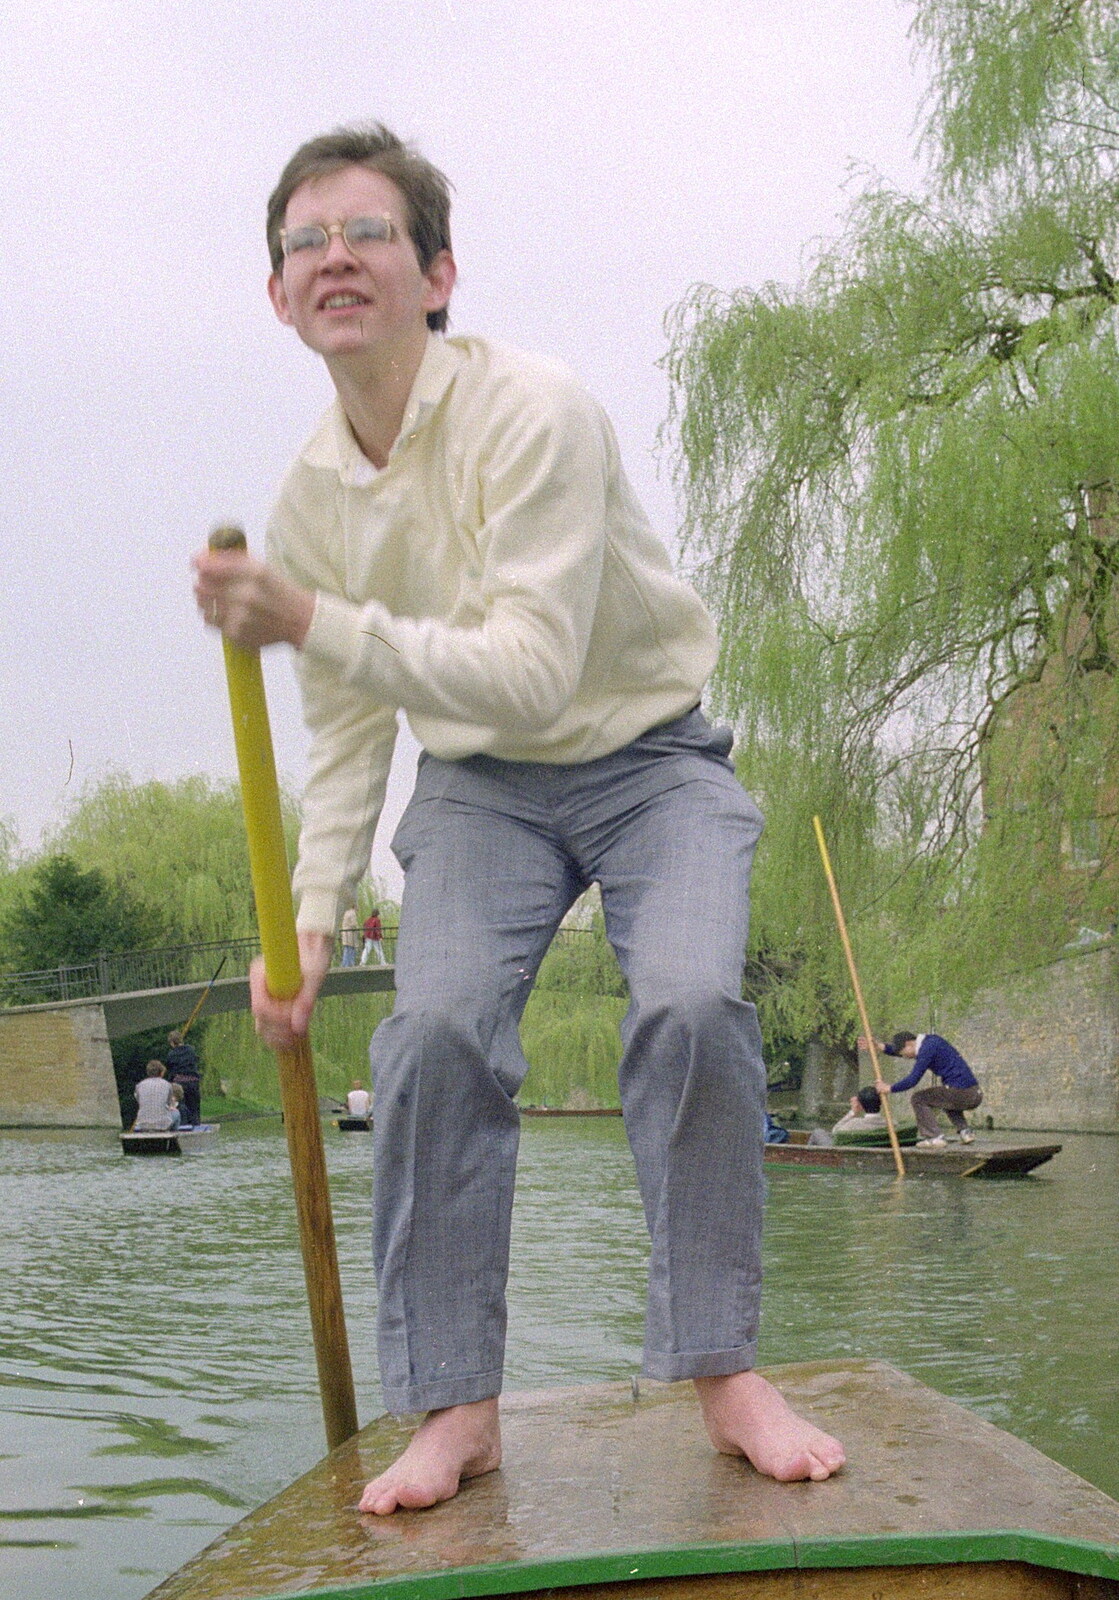 Phil punts in bare feet from A Trip to Trinity College, Cambridge - 23rd March 1986